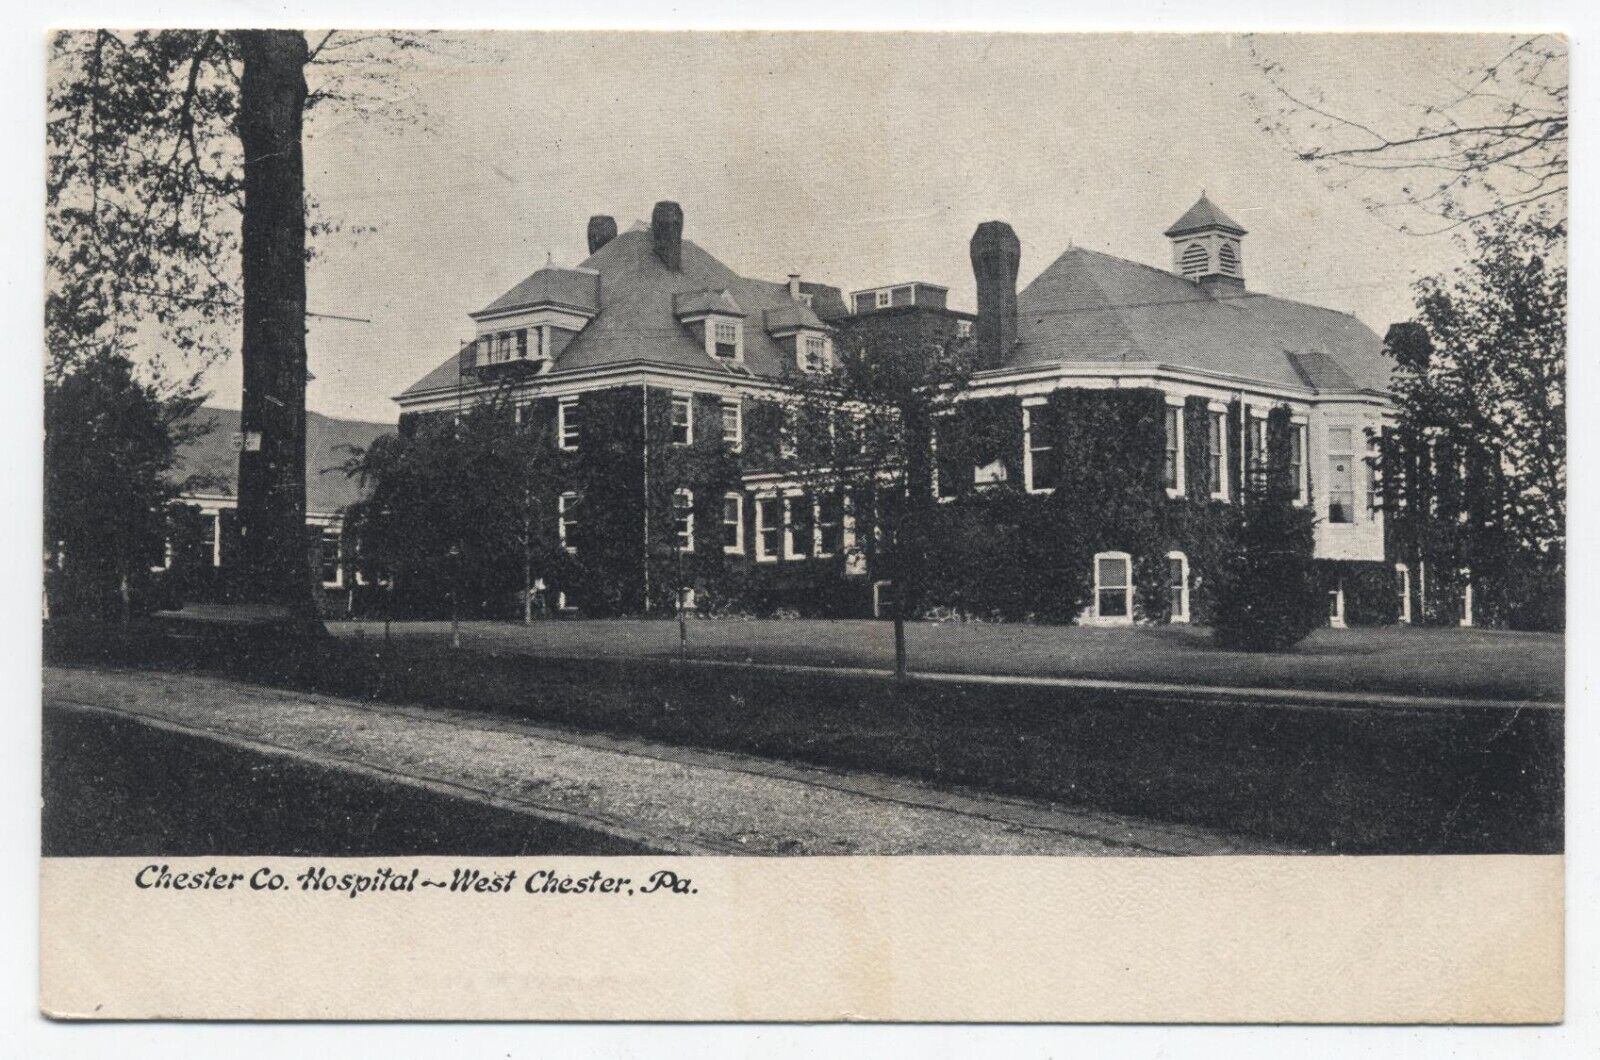 PA ~ Hospital Buildings WEST CHESTER Pennsylvania c1906 Chester County Postcard